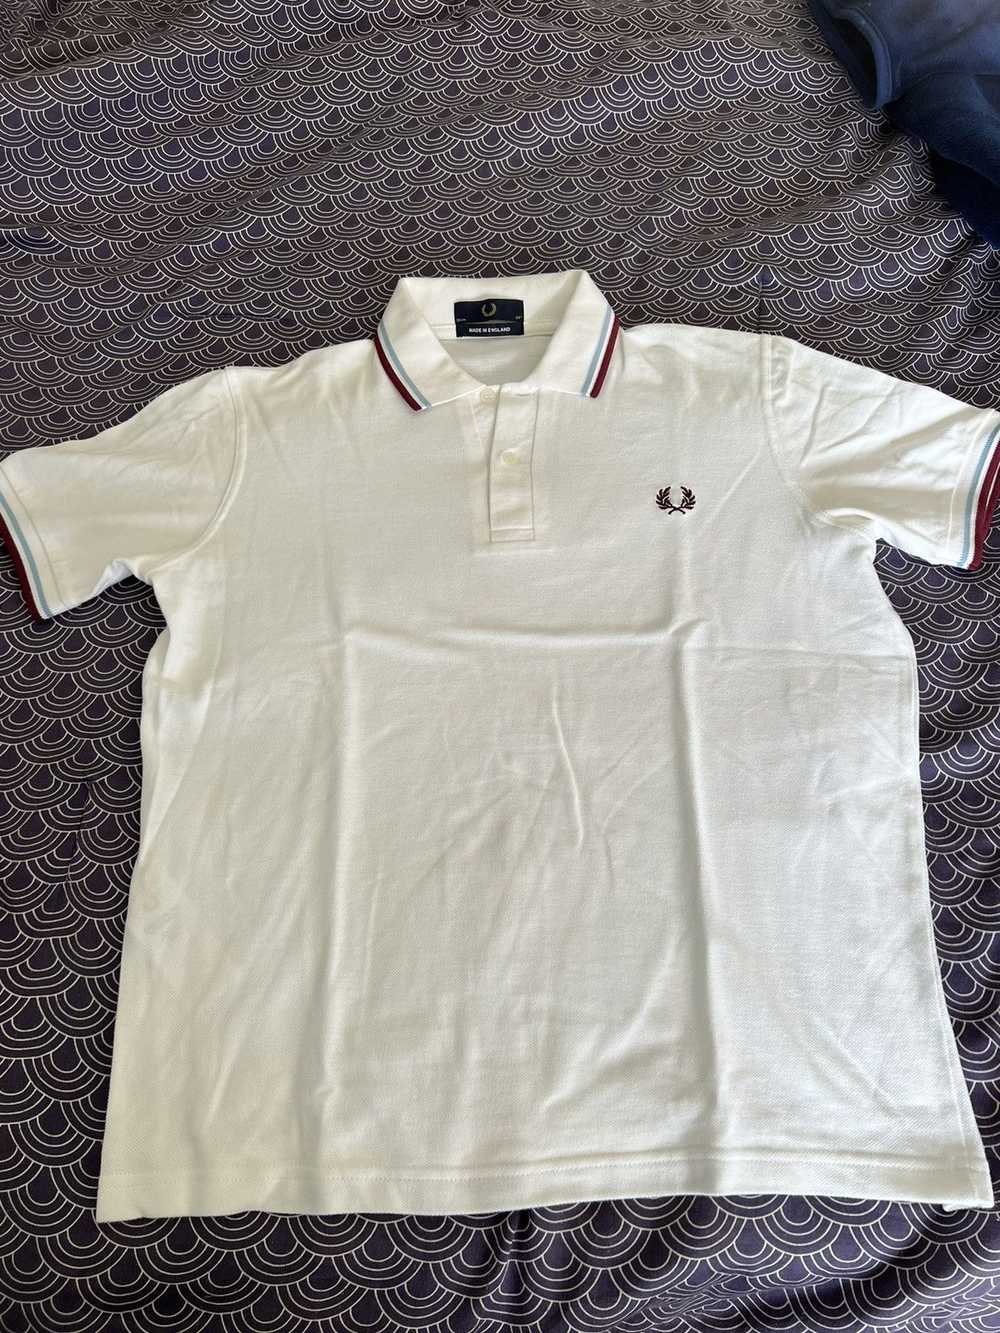 Fred Perry The Fred Perry Shirt (MADE IN ENGLAND) - image 1